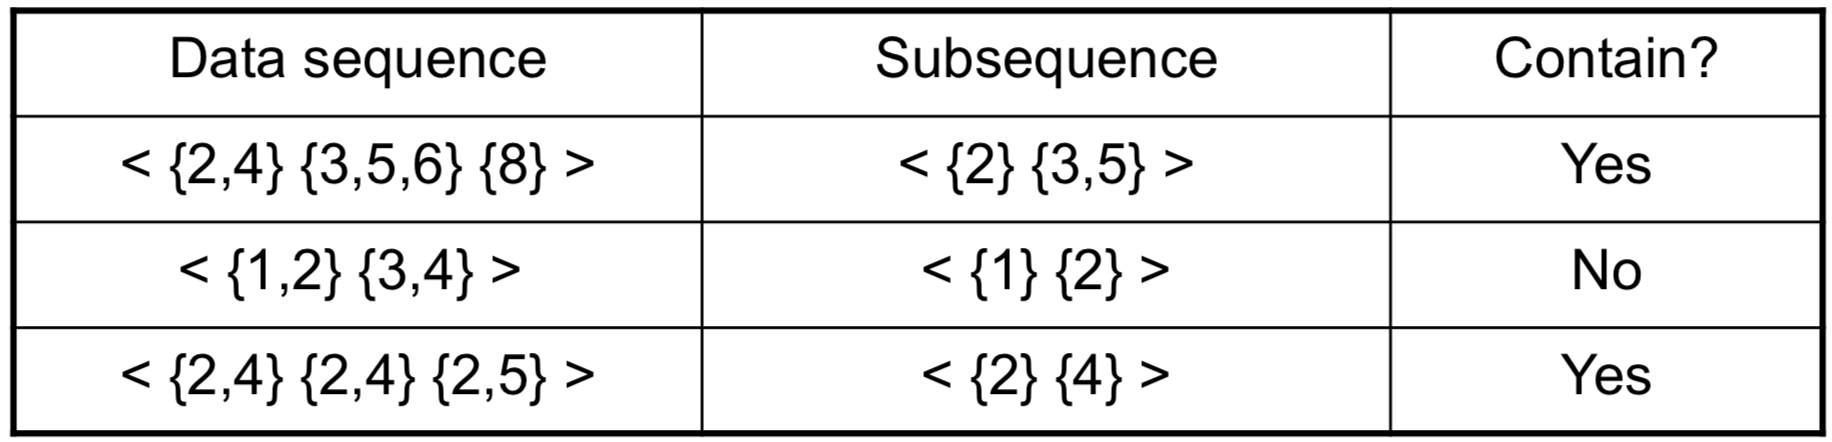 Subsequence Example